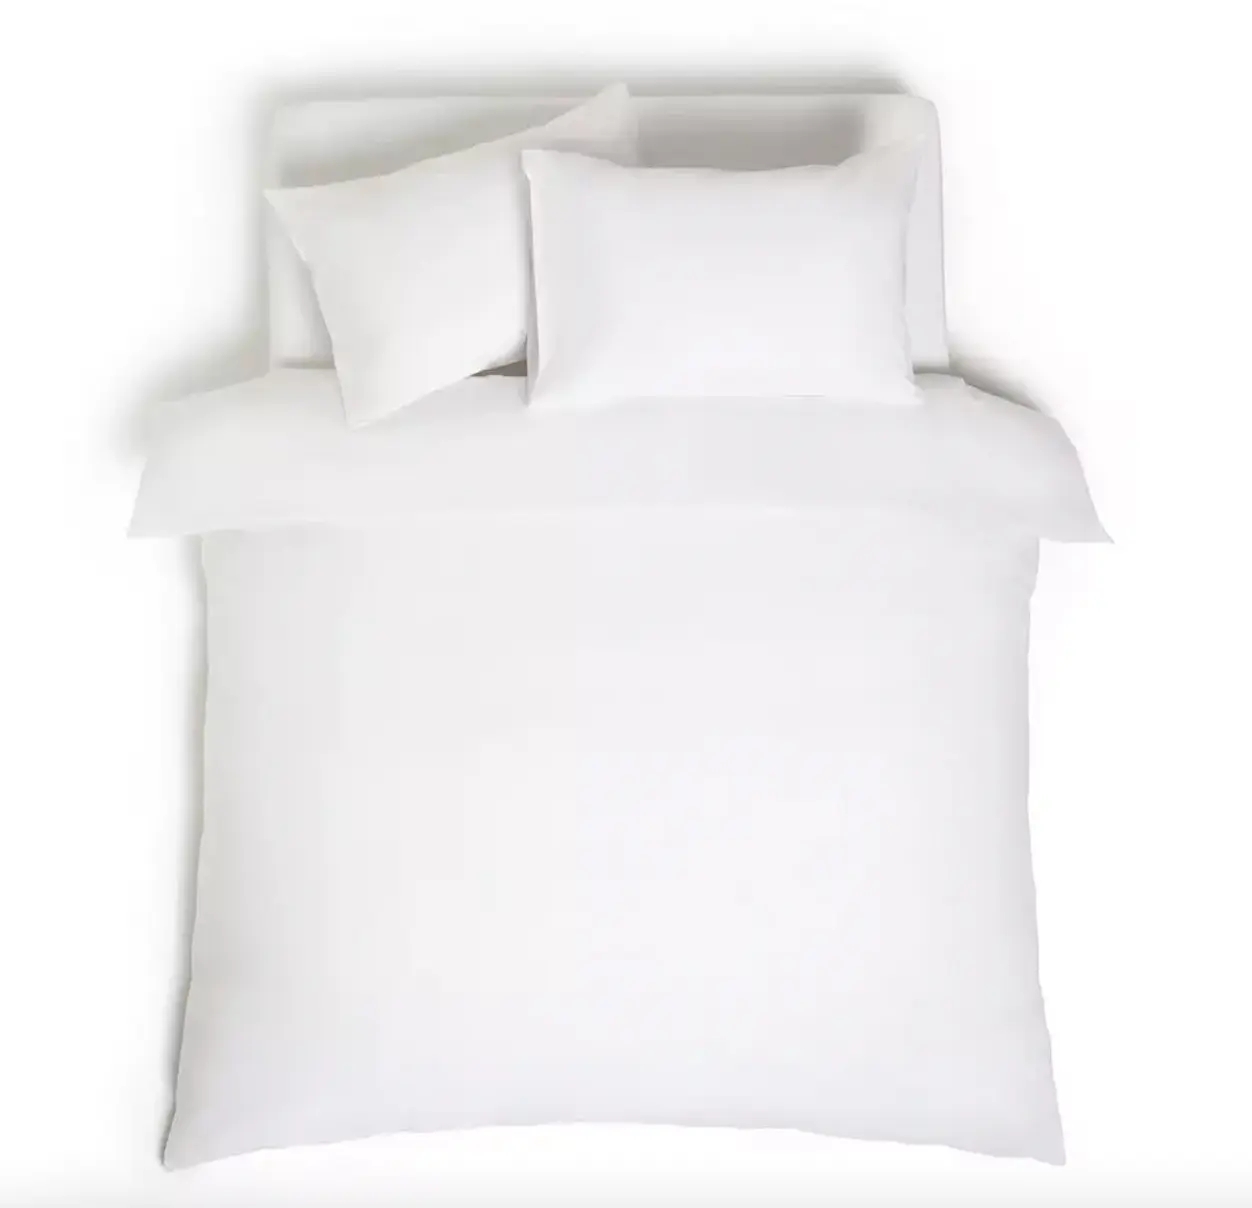 Zadetex 100% Cotton Bedding Sets Hypoallergenic Easy to Clean Breathable White Homeowners Rentals Hotels